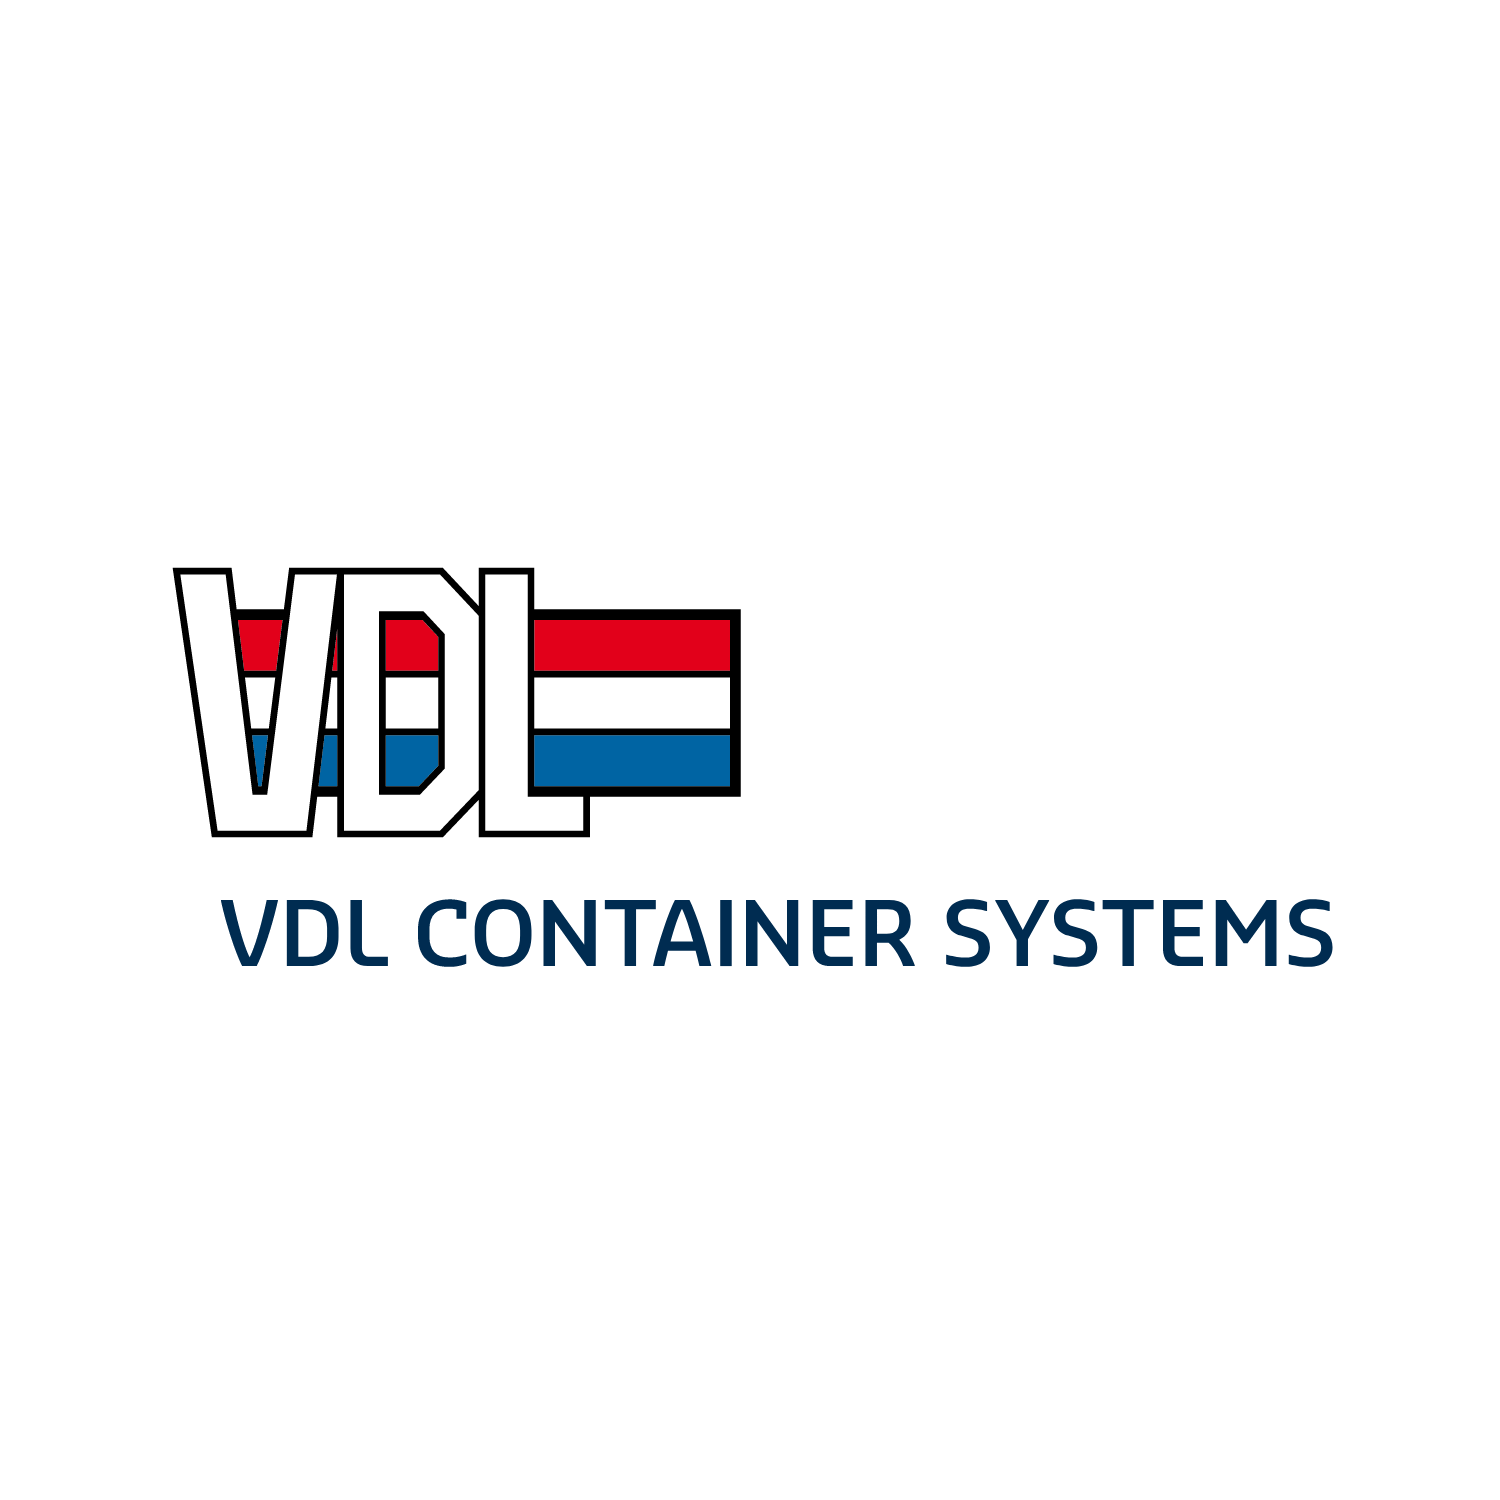 VDL Container Systems